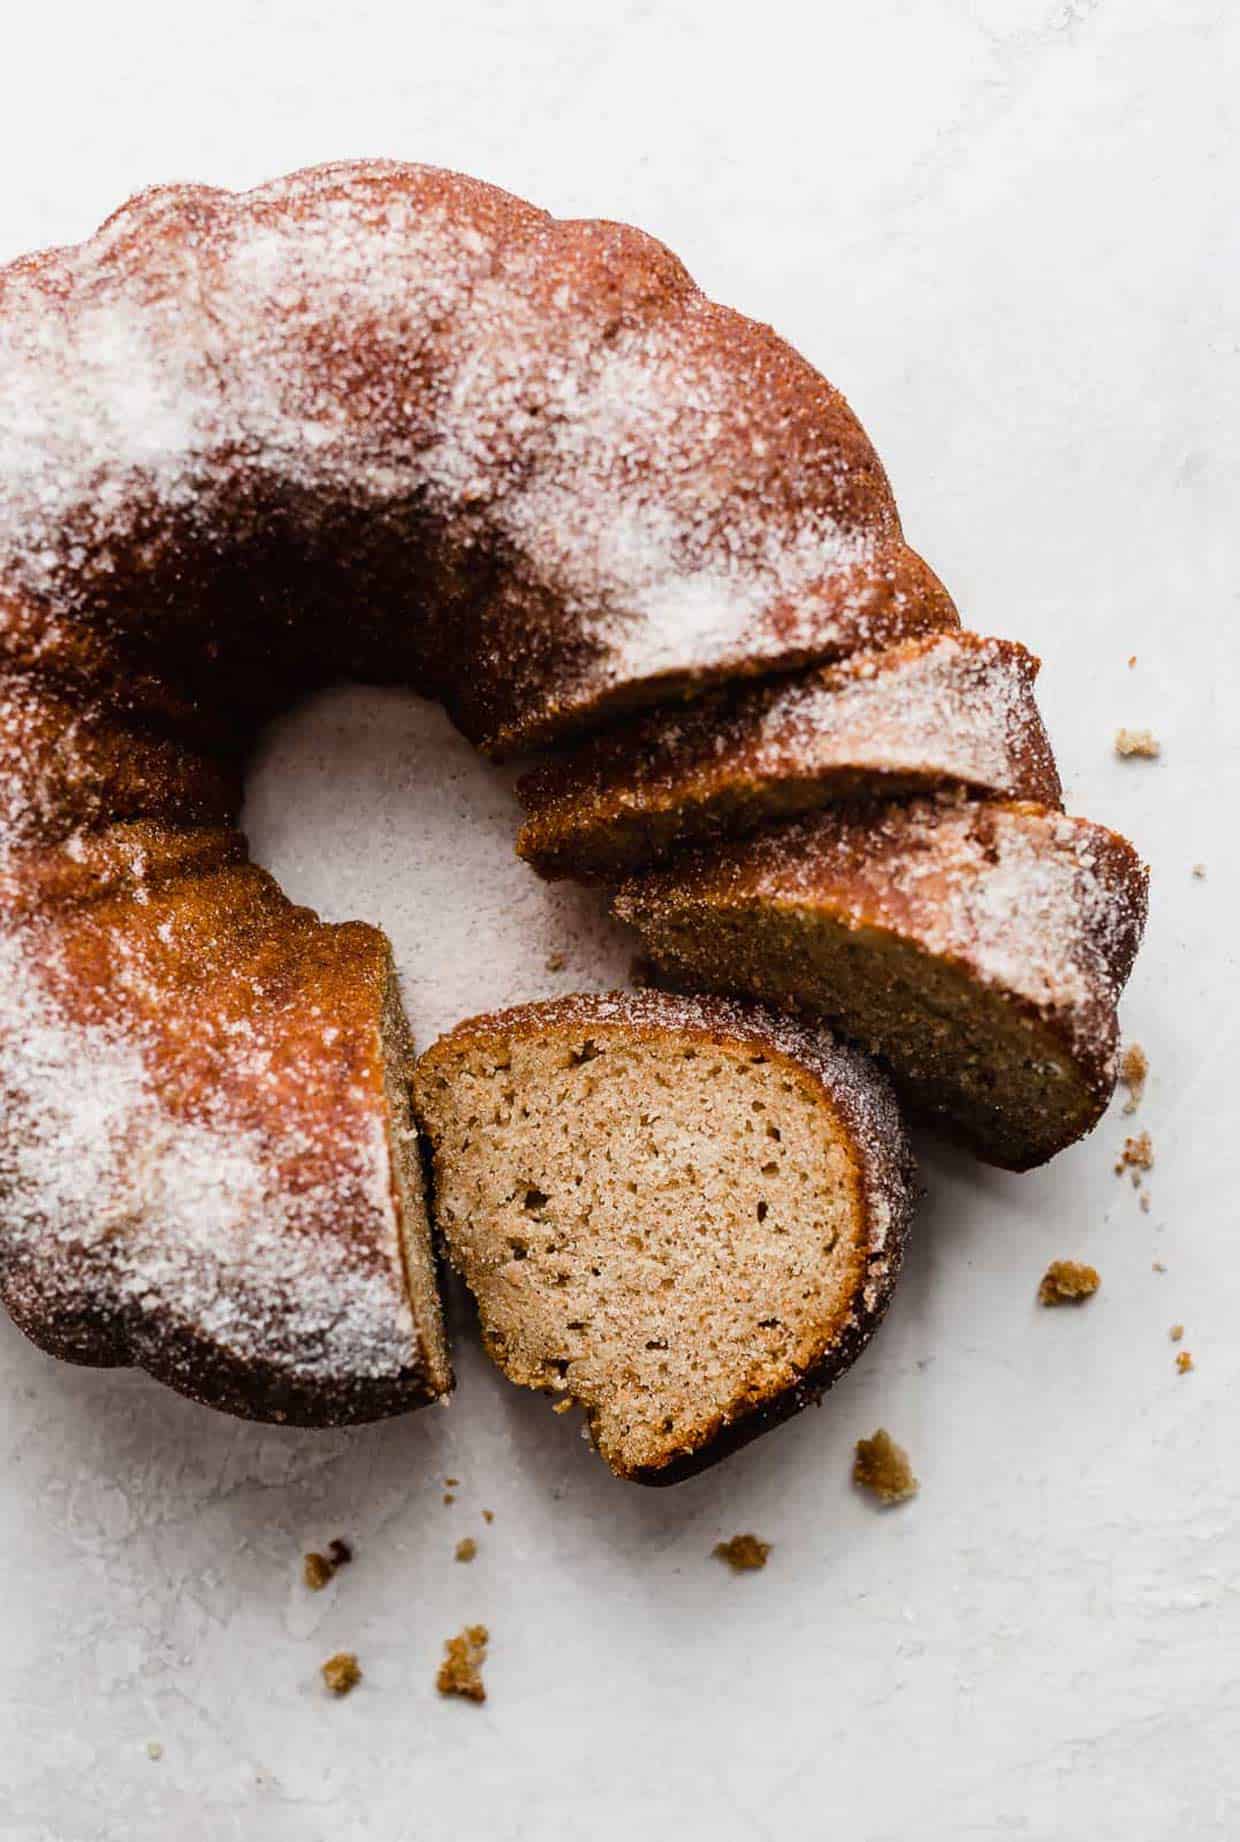 an apple cider coffee cake made in a bundt pan on a white background with three slices cut from the bundt cake.